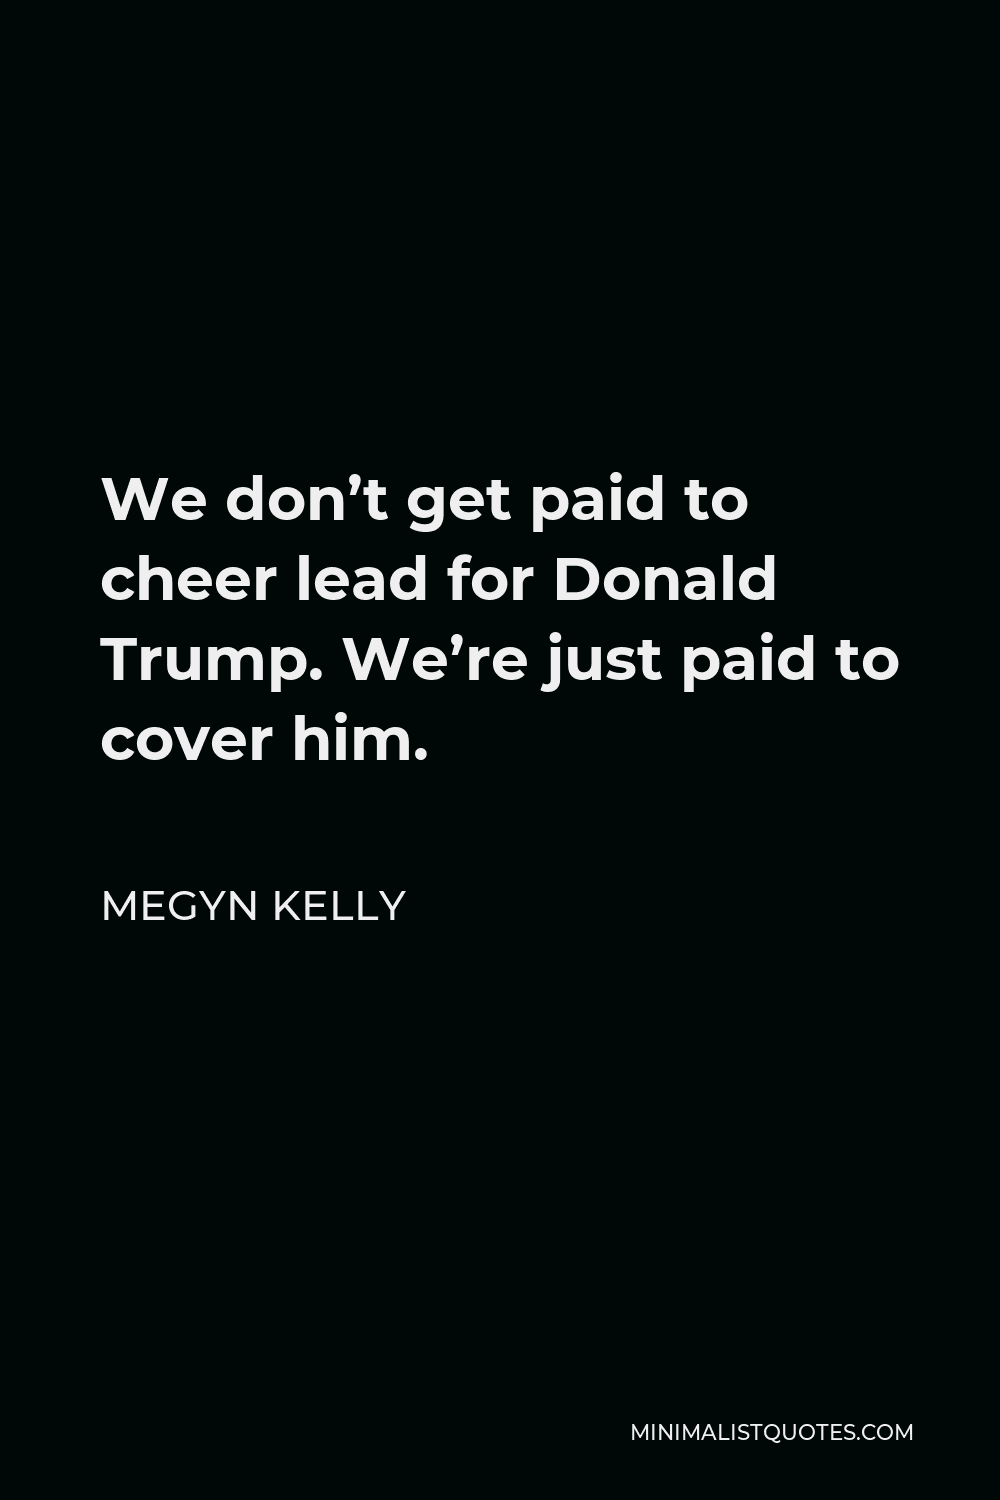 Megyn Kelly Quote We don't get paid to cheer lead for Donald Trump. We